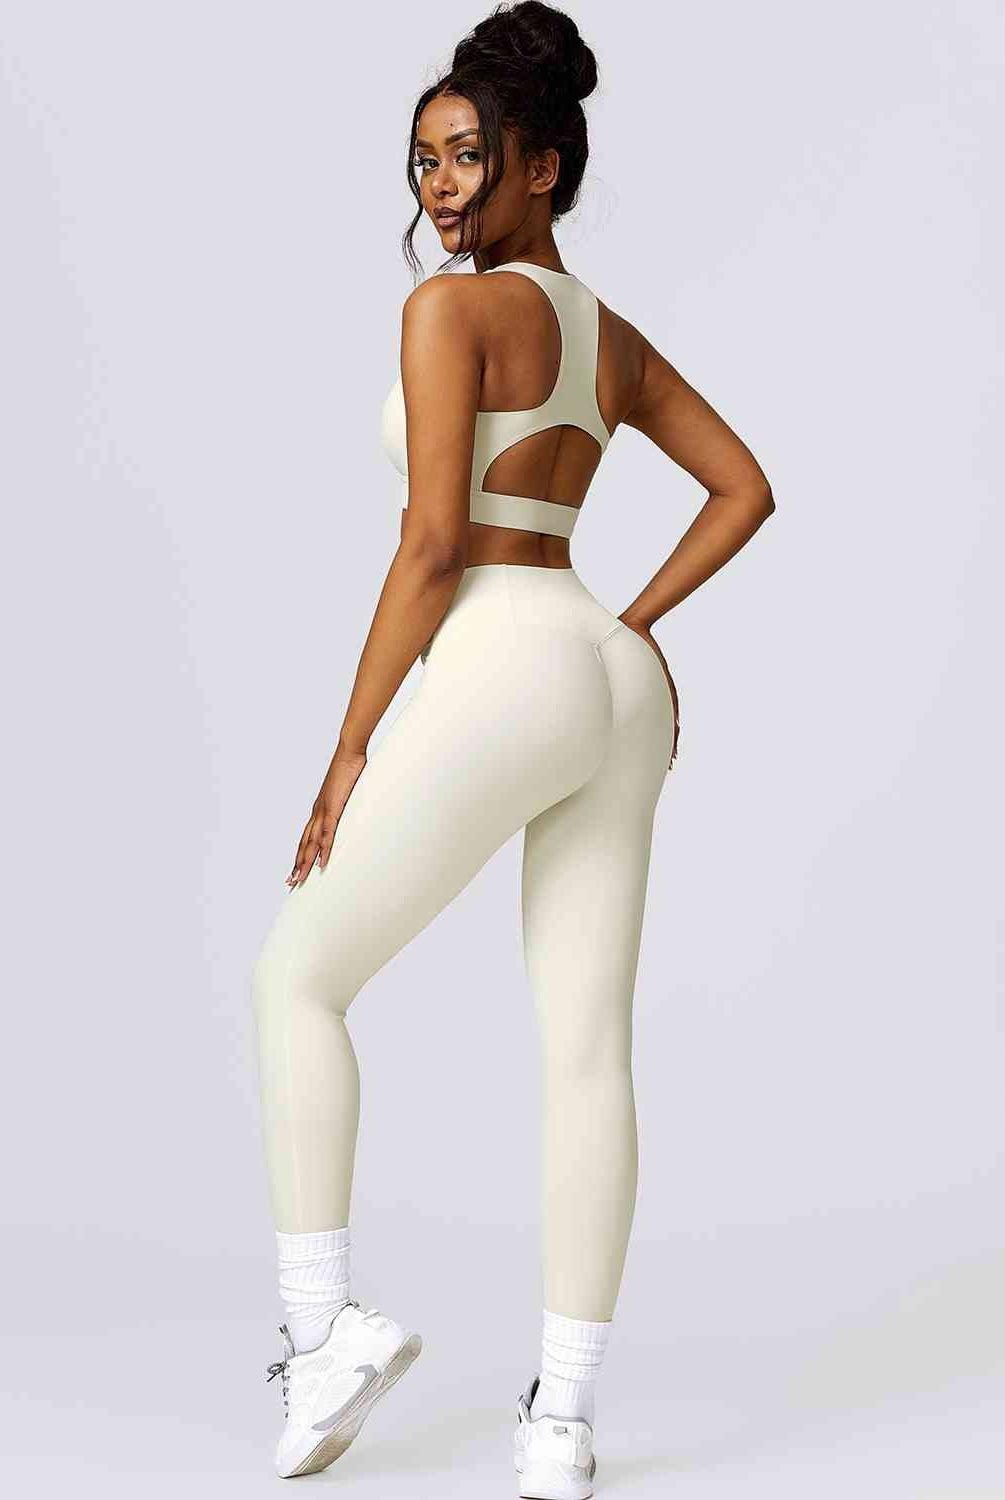 Cutout Cropped Sport Tank and Leggings Set - GemThreads Boutique